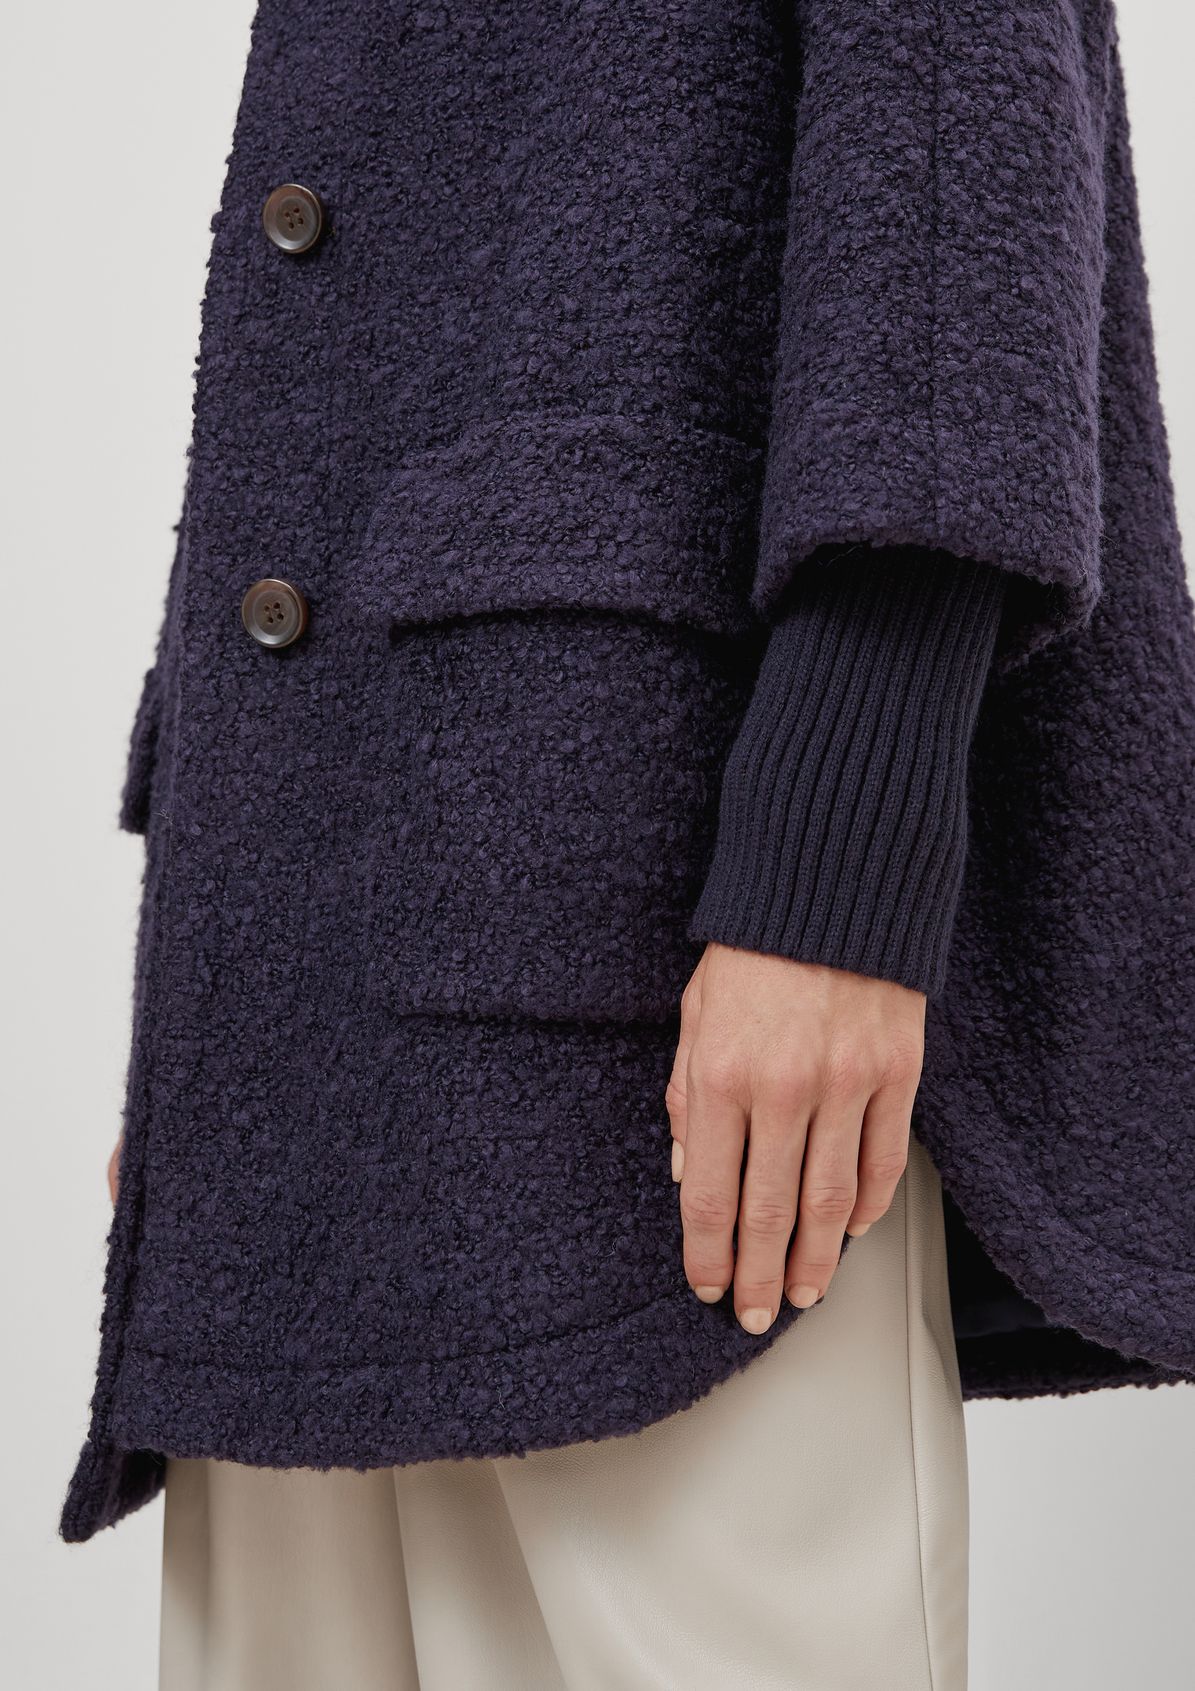 Bouclé coat in a layered look from comma